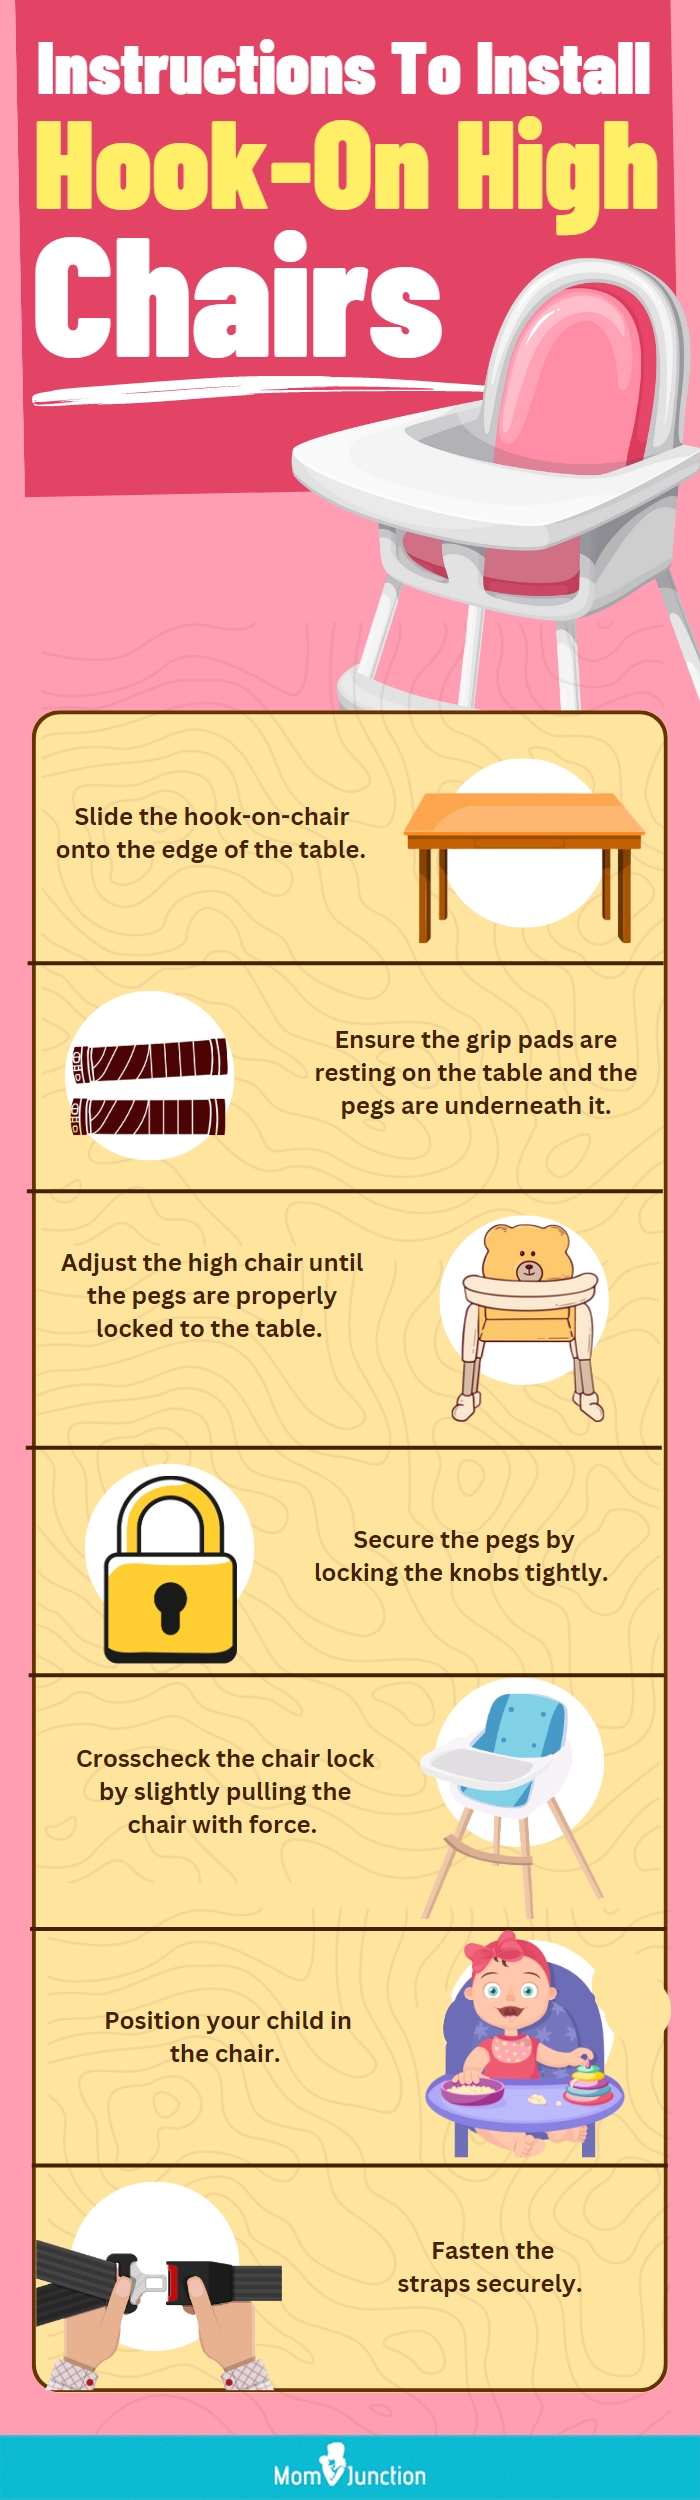 Instructions To Install Hook-On High Chairs Row (infographic)